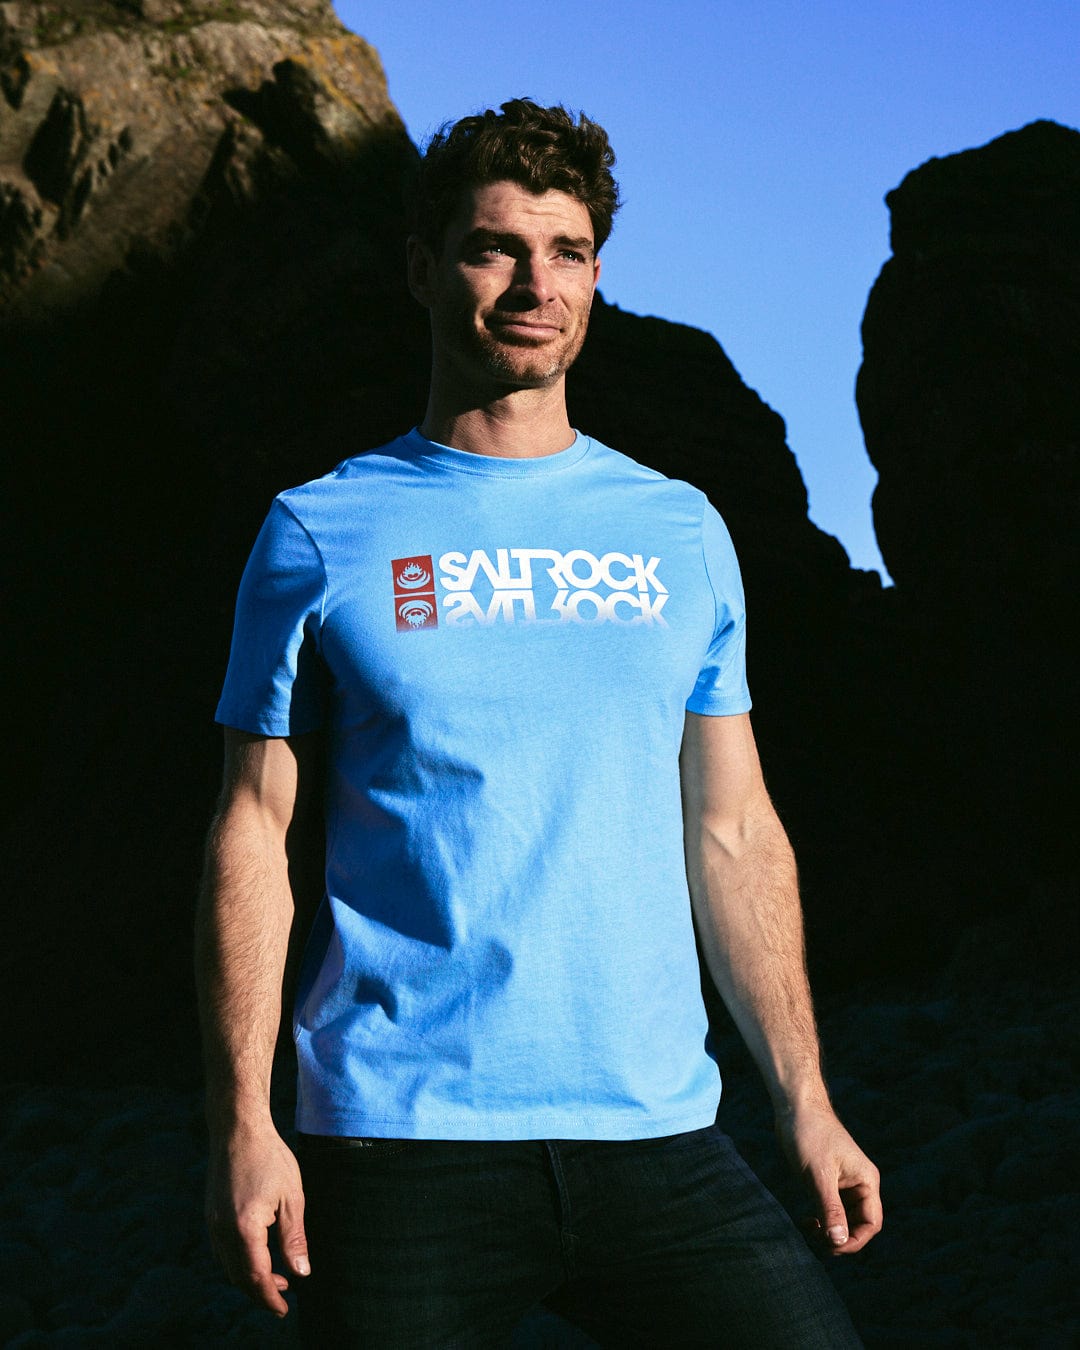 A man wearing a blue Reflect - Mens T-Shirt - Blue with Saltrock branding, standing in front of rocks.